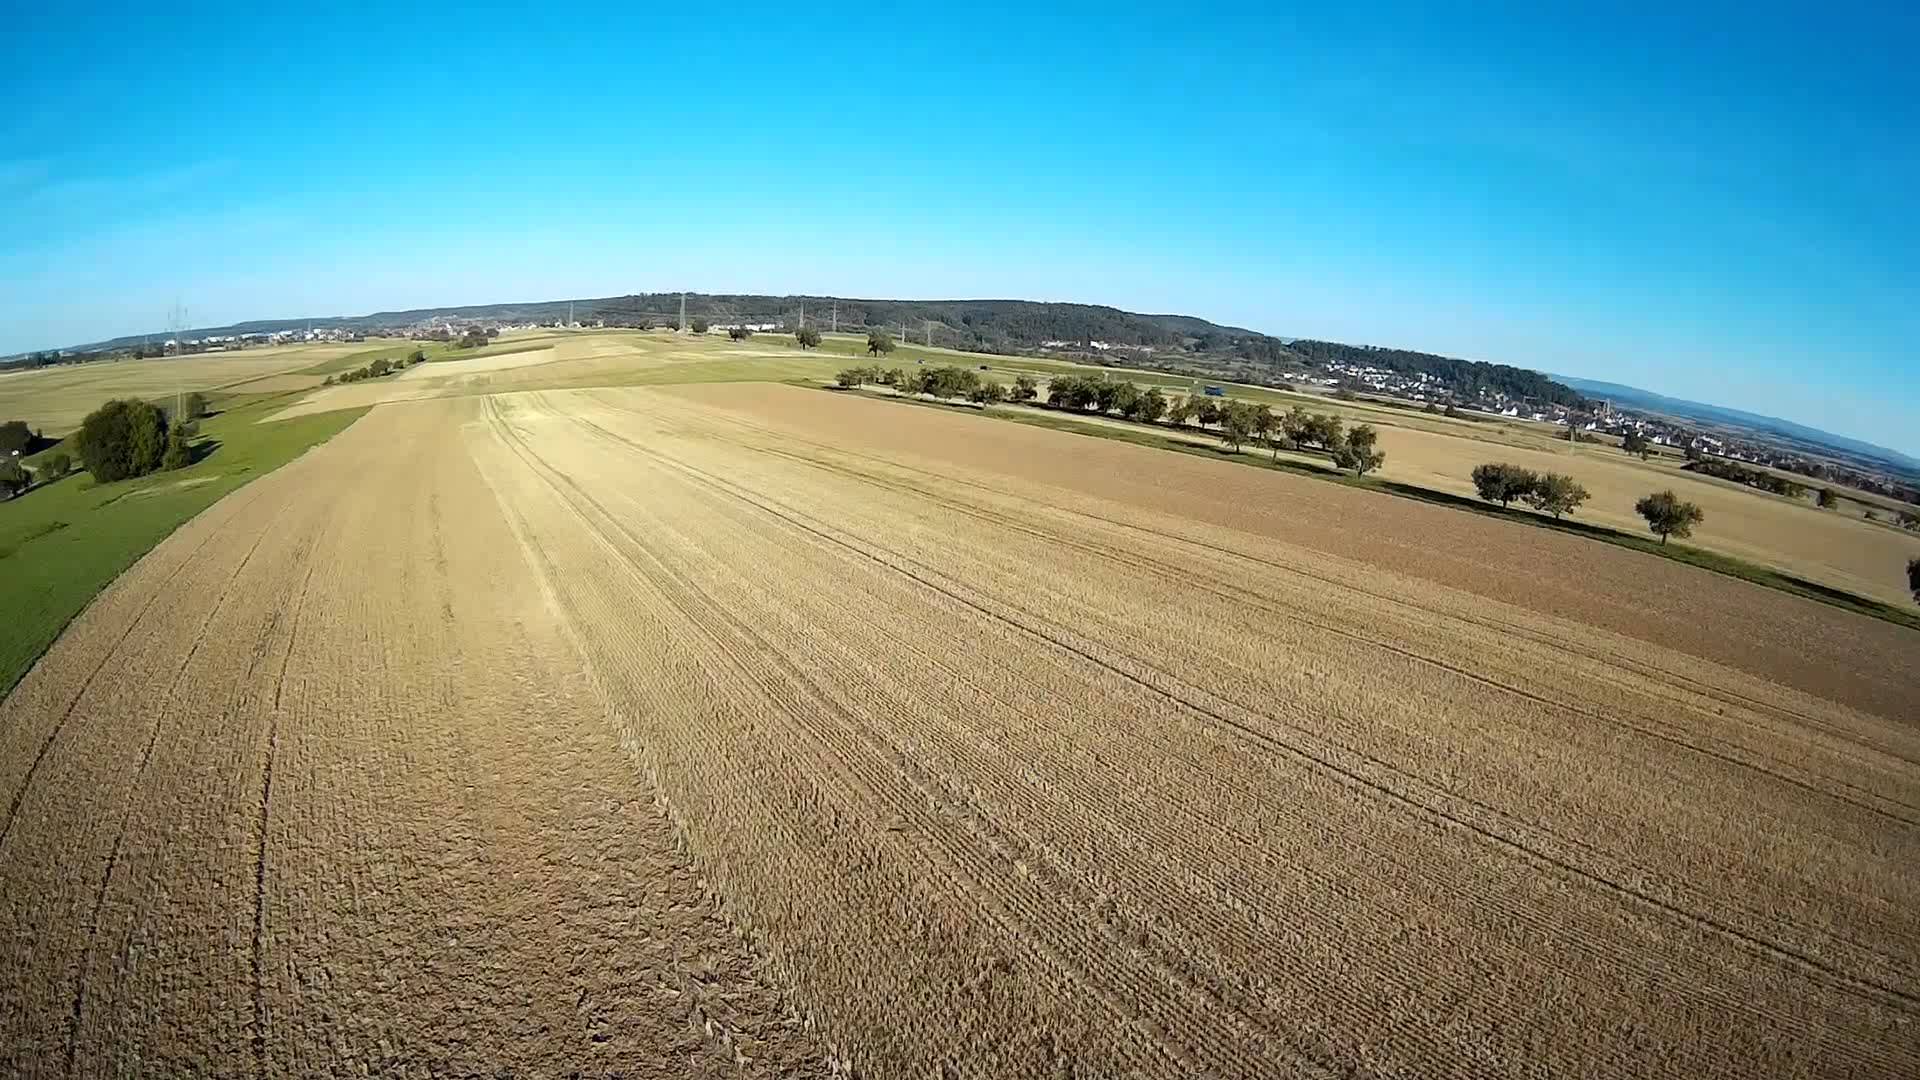 Testflight with the new Mobius Version 3 Wide Angle Lens C2 - YouTube